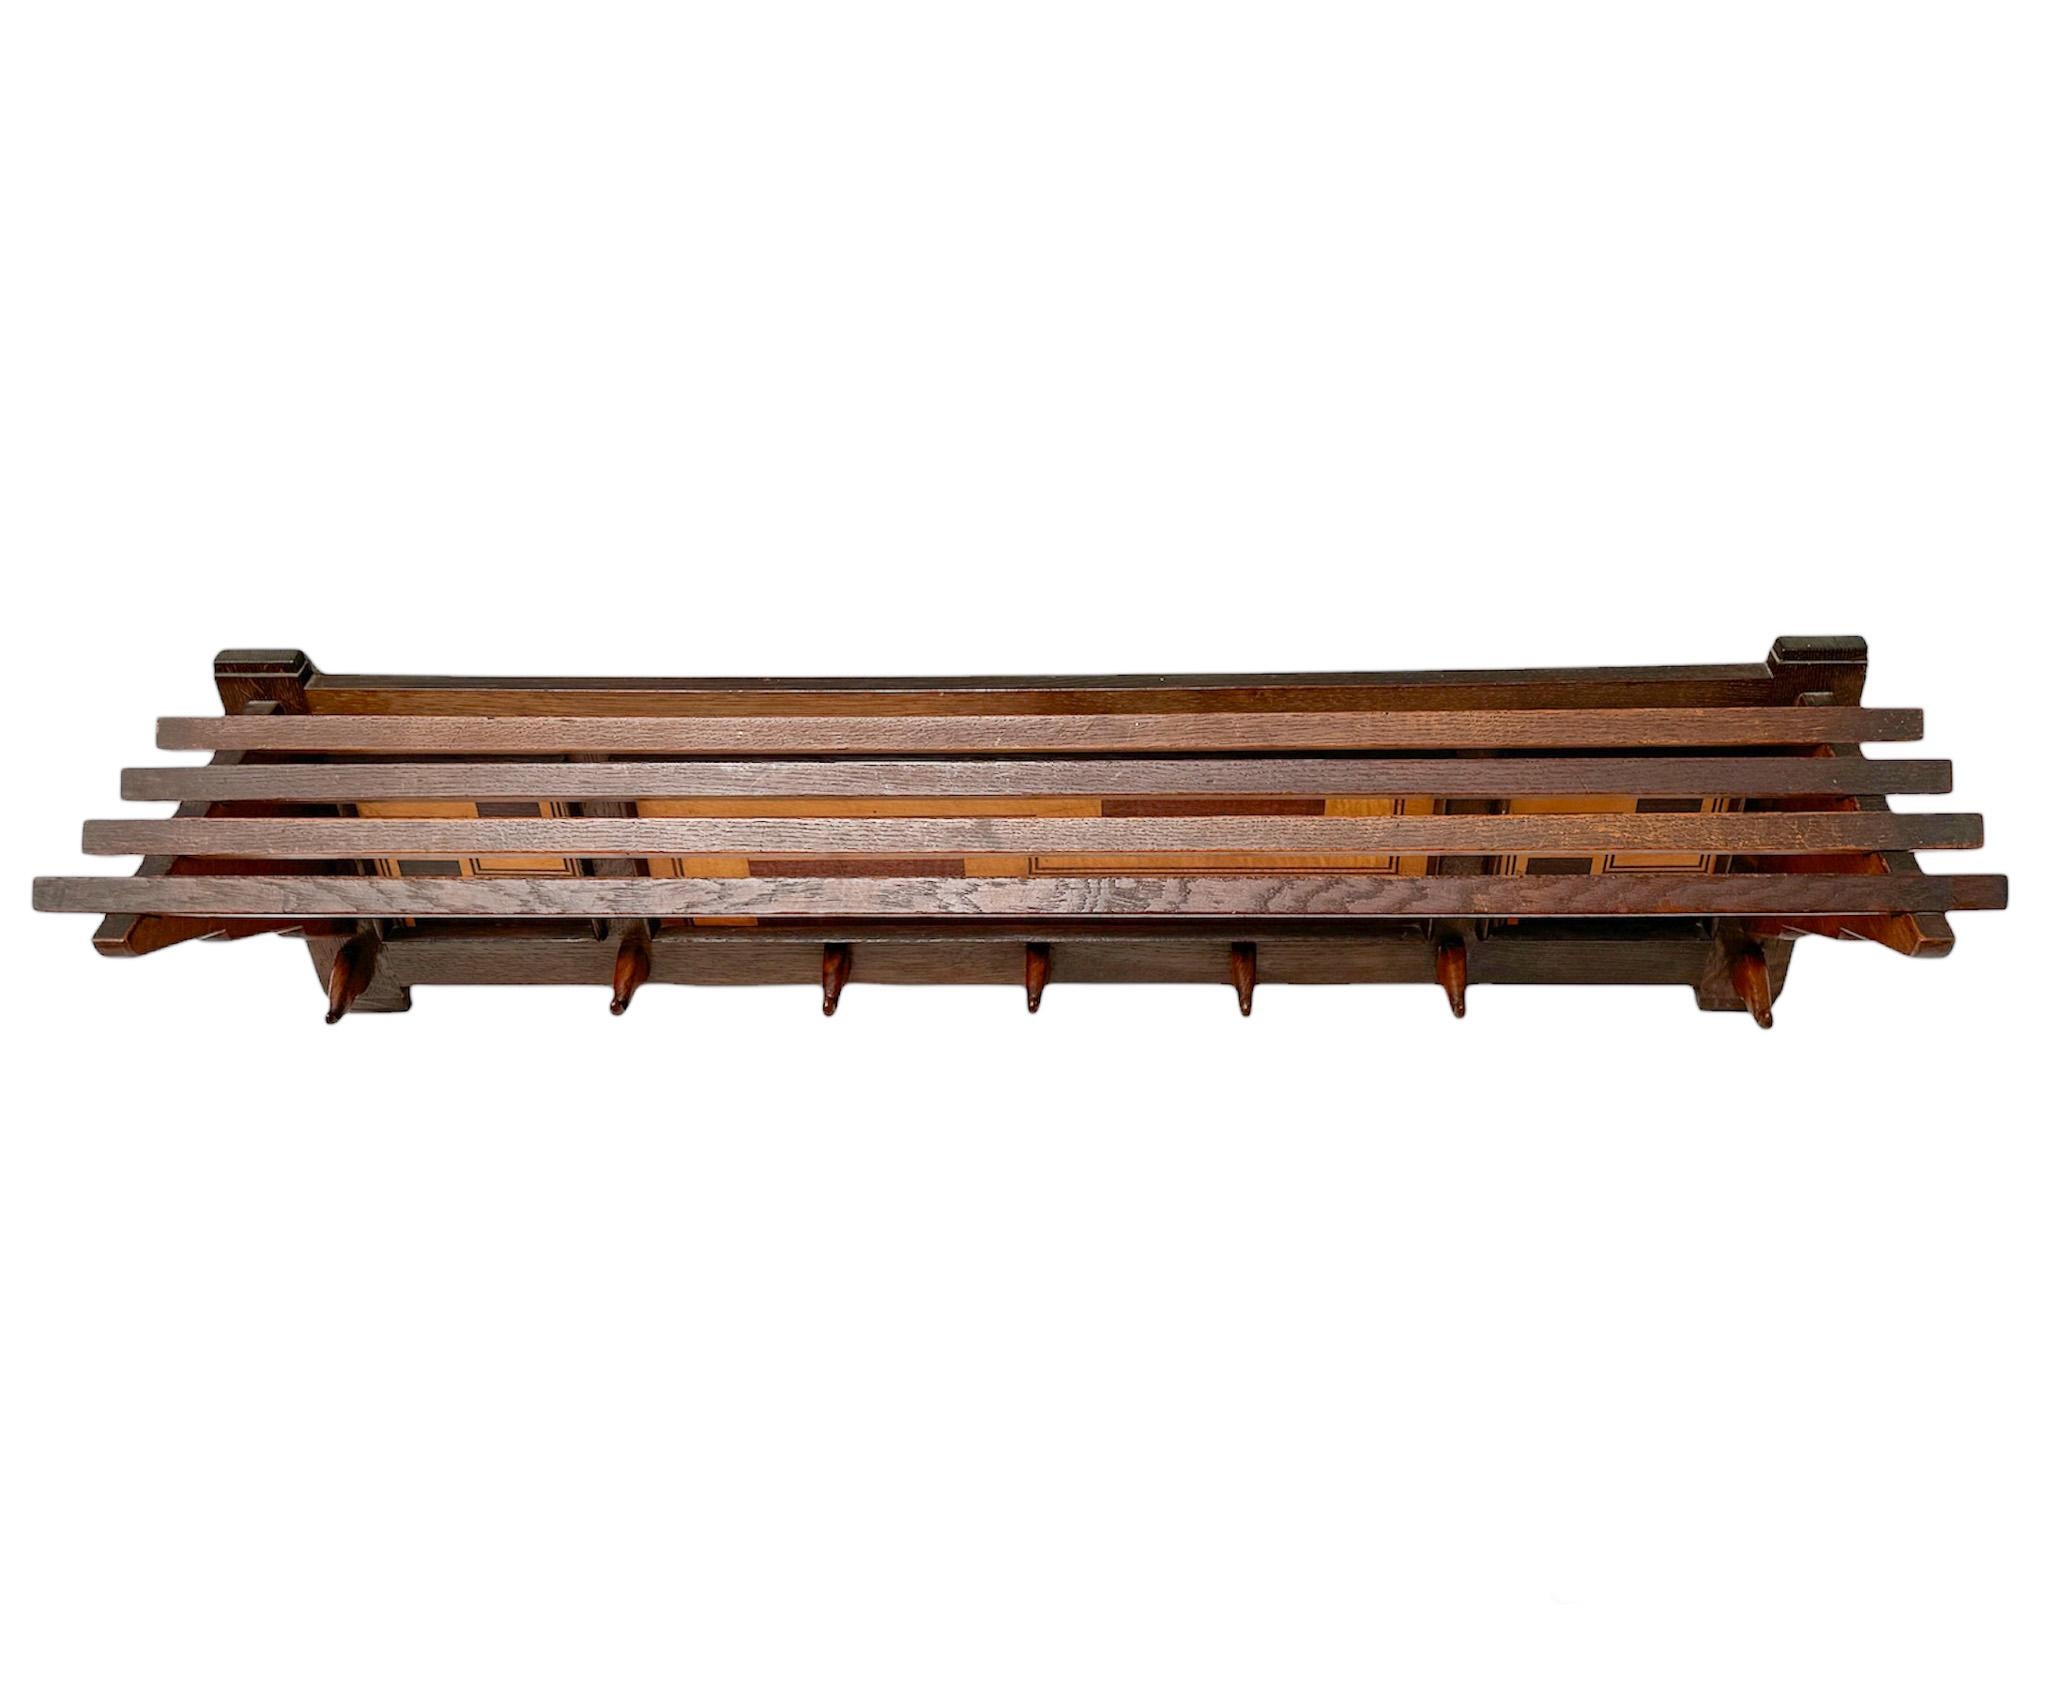 Magnificent and rare Art Deco Amsterdamse School coat rack.
Design by L.O.V. Oosterbeek.
Striking Dutch design from the 1920s.
Solid oak with original decorative satinwood details.
Seven original and stylish wooden hooks.
Marked with original